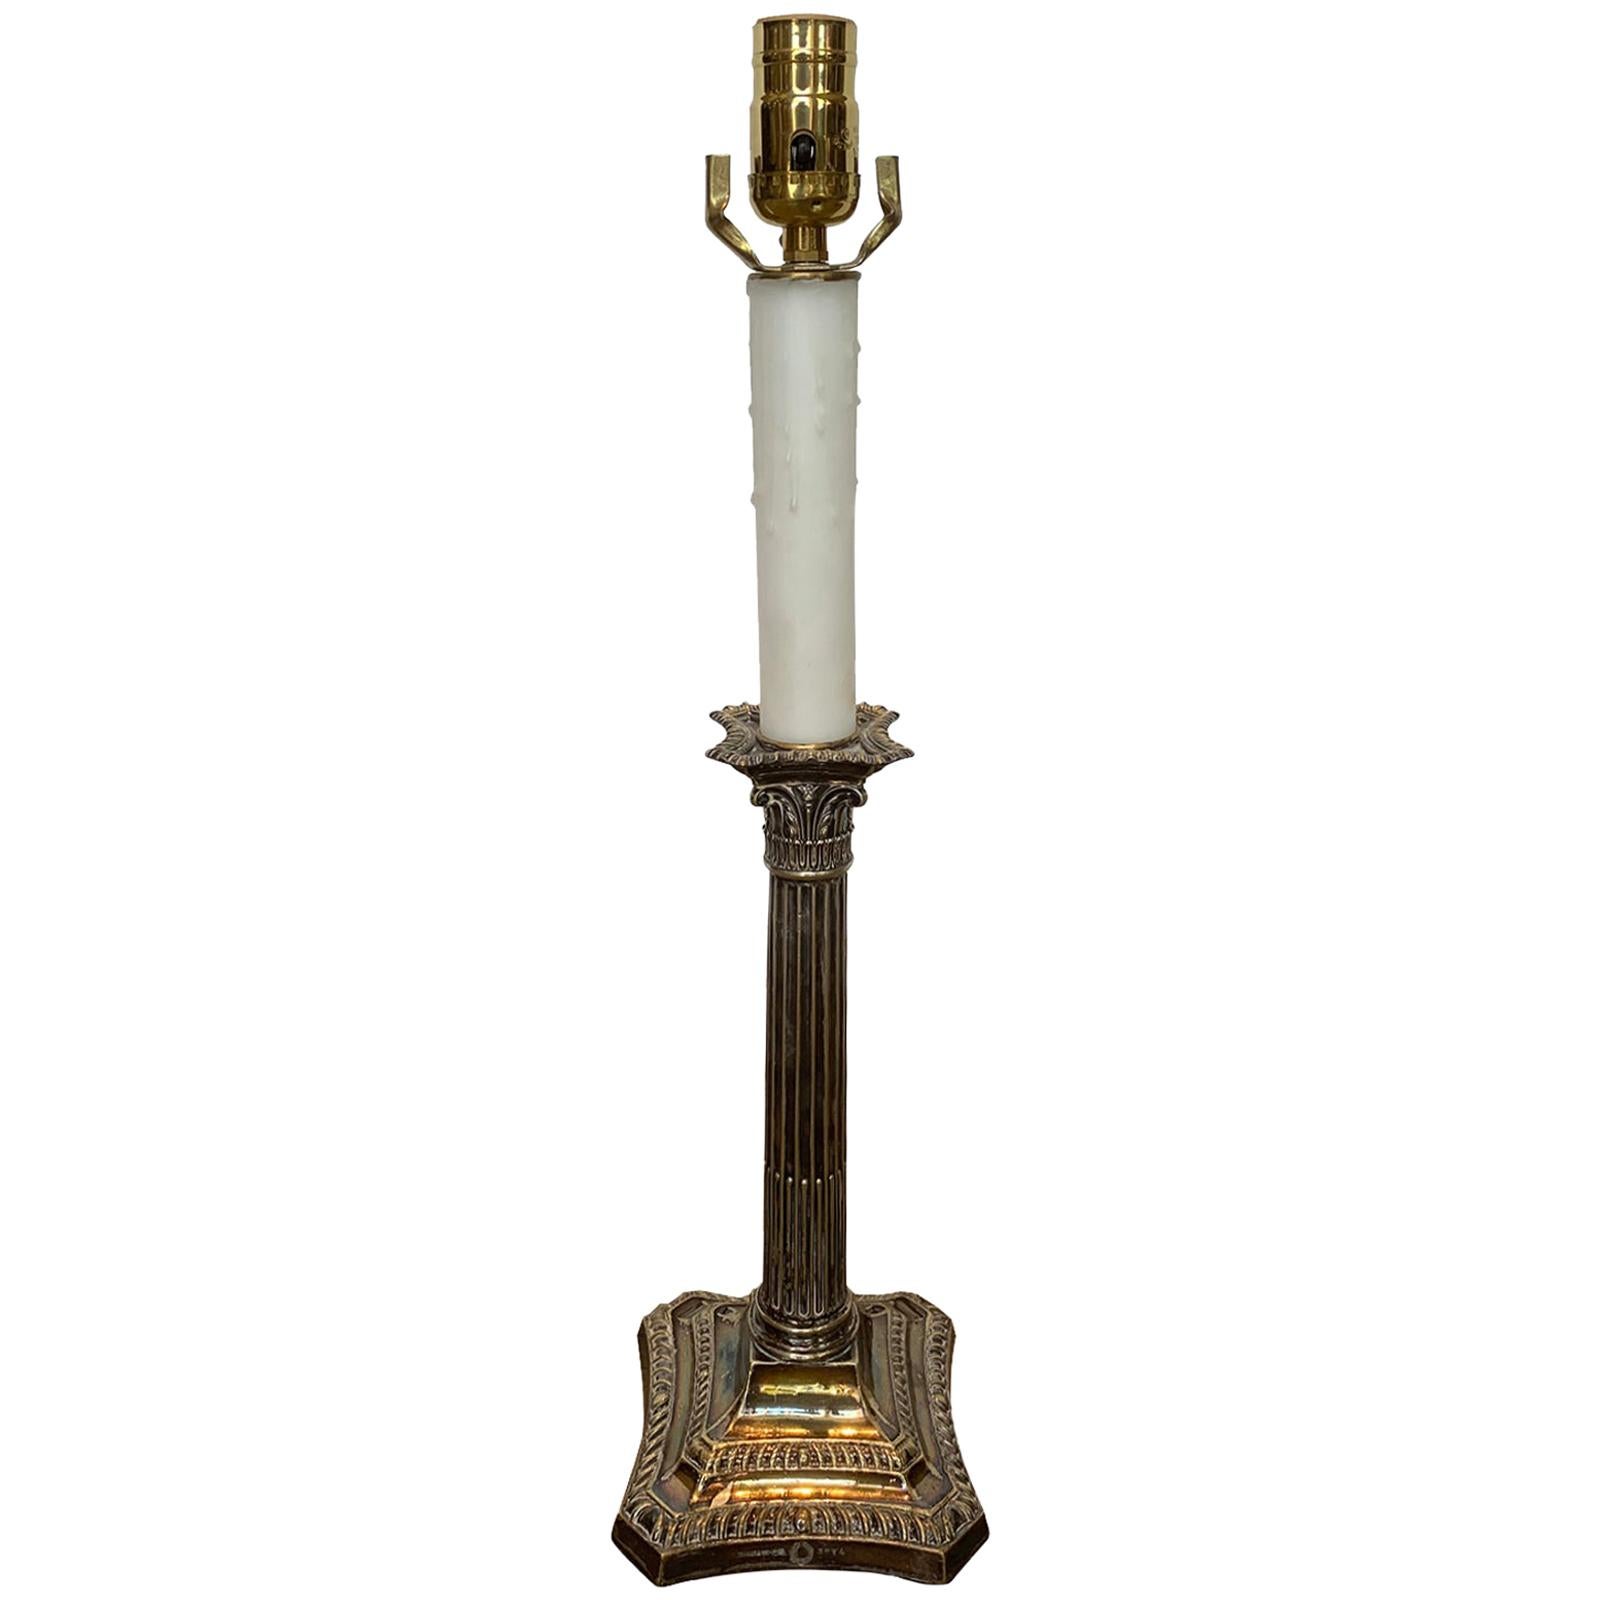 19th-20th Century English Neoclassical Silver Plate Column Candlestick Lamp For Sale